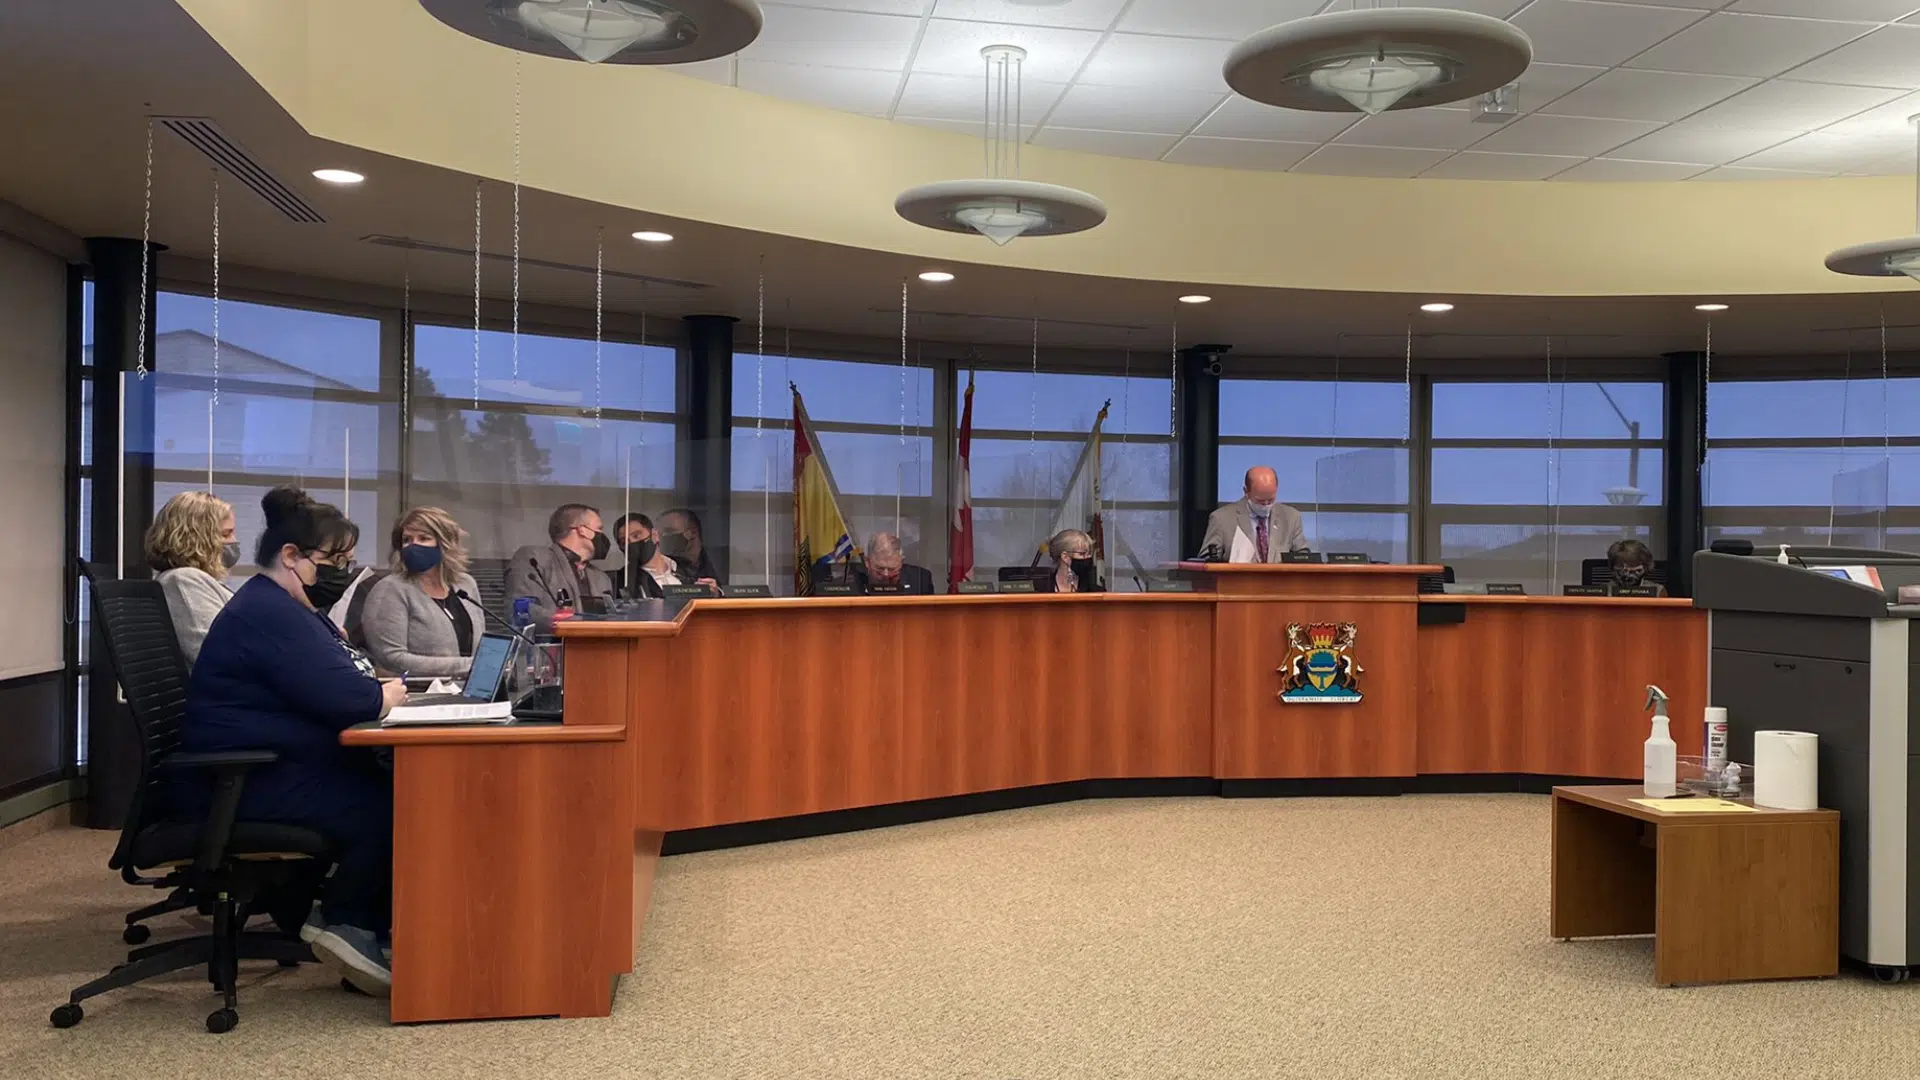 Quispamsis Will Keep Livestreaming Council Meetings